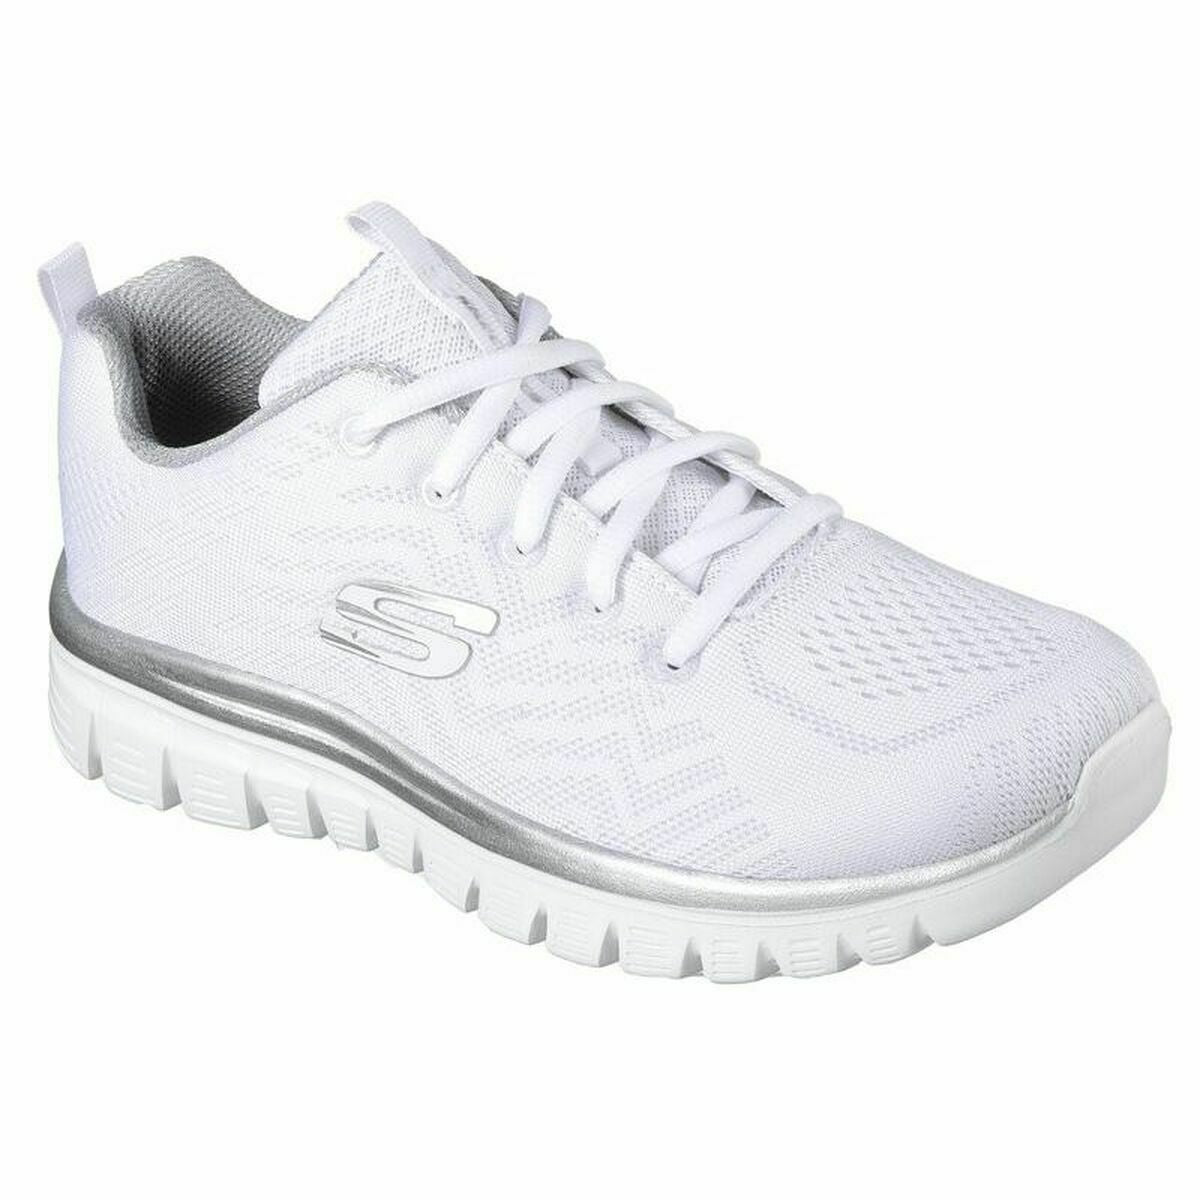 Women's casual trainers Skechers White Lady